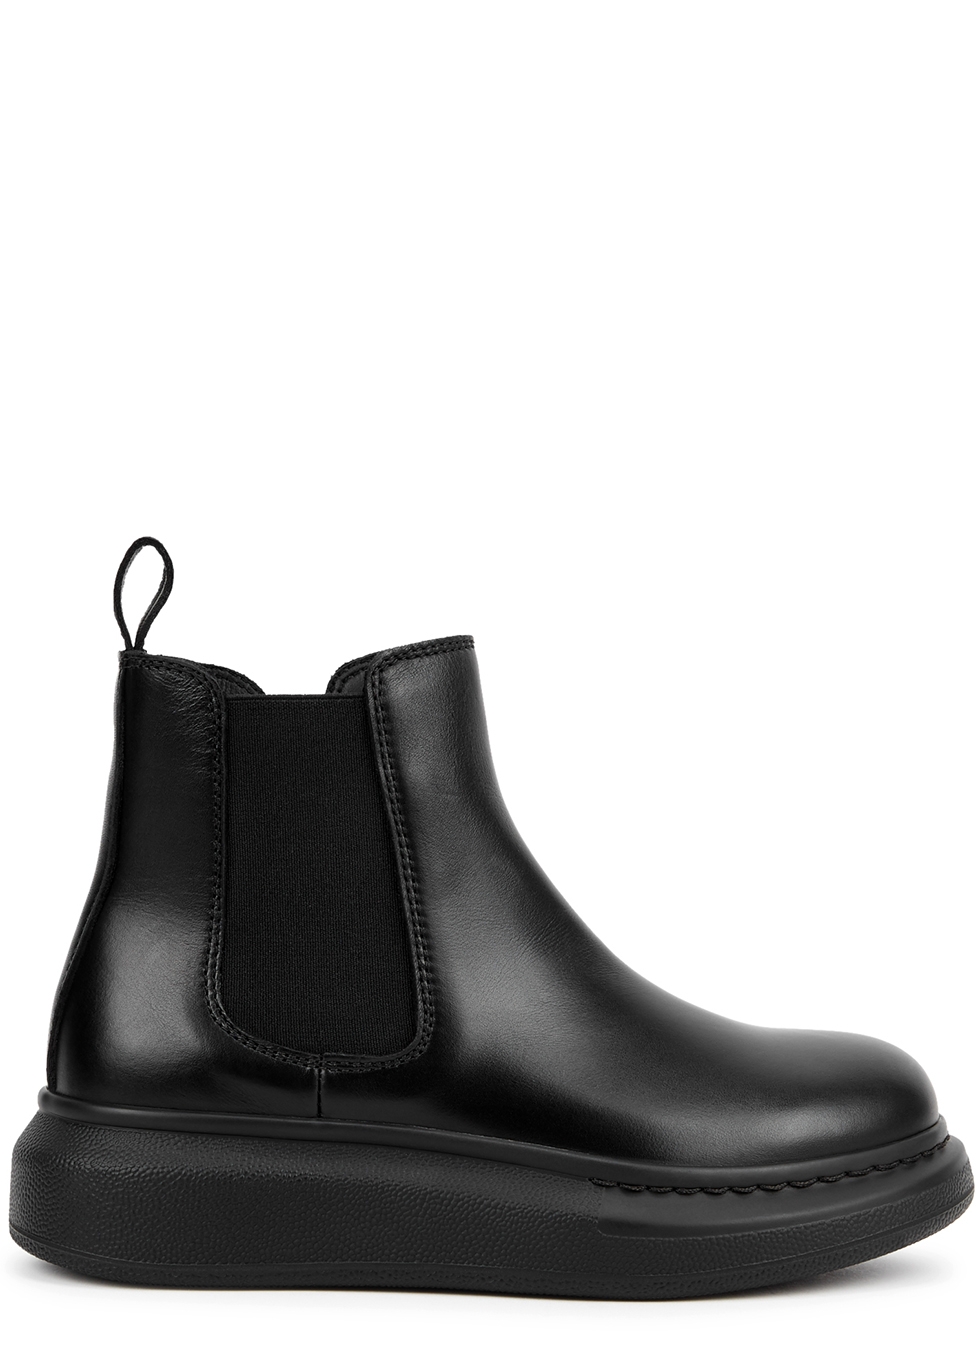 KIDS Black leather Chelsea boots